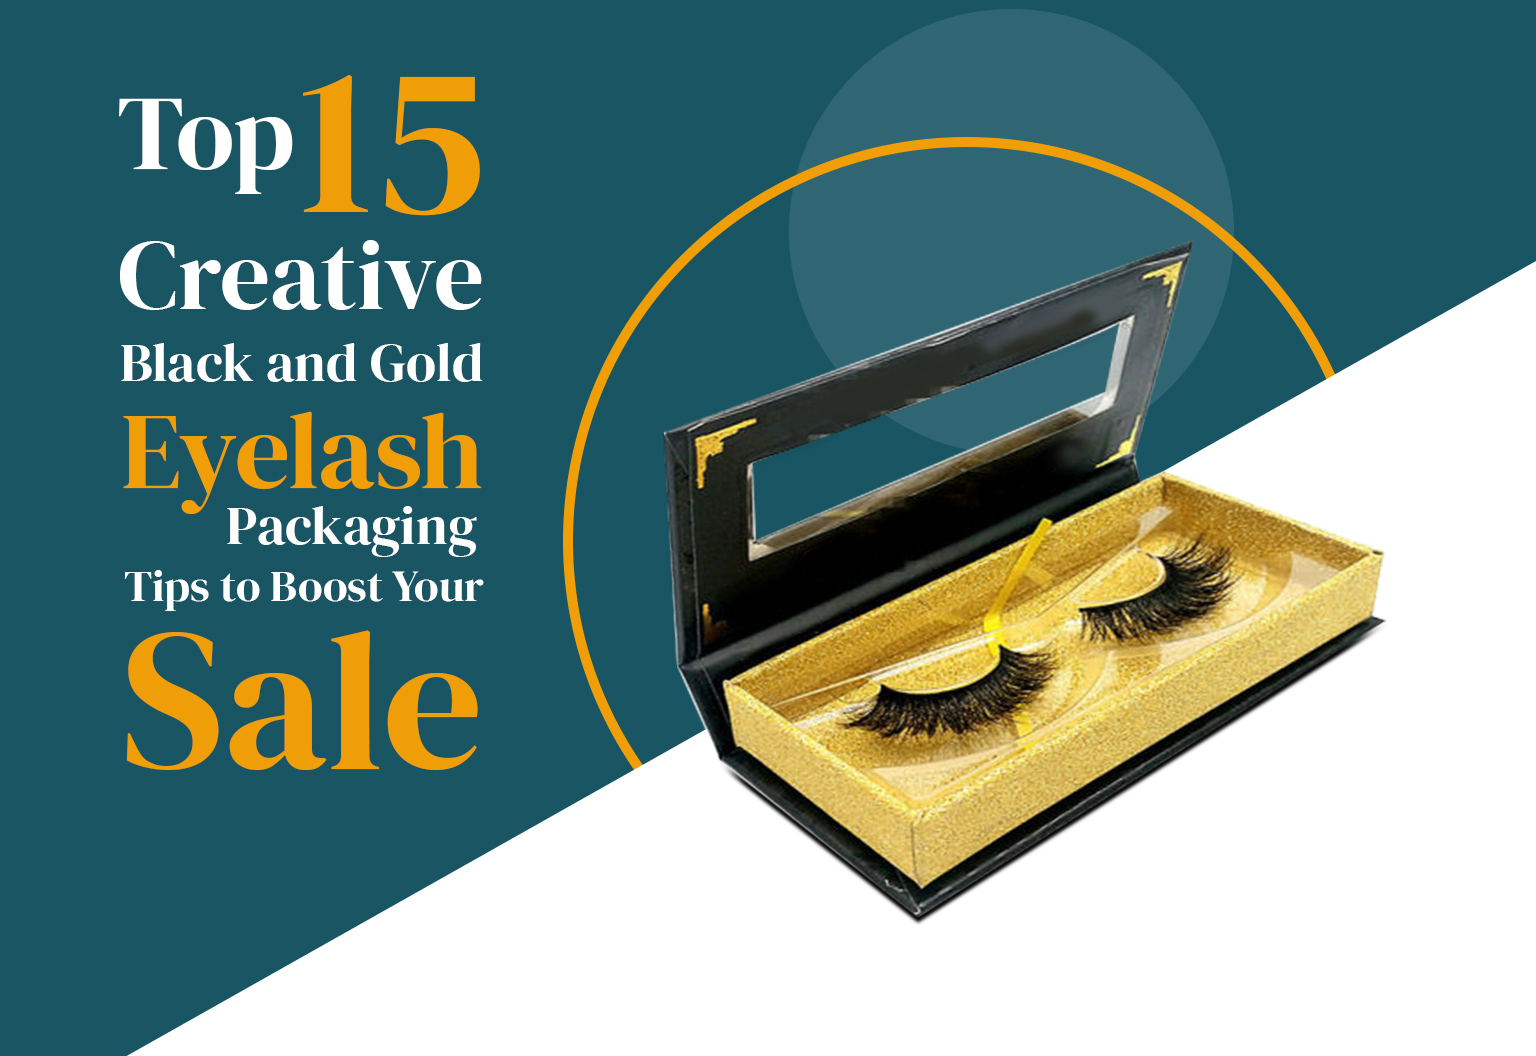 Top-15-Creative-Black-and-Gold-Eyelash-Packaging-Tips-to-Boost-Your-Sales